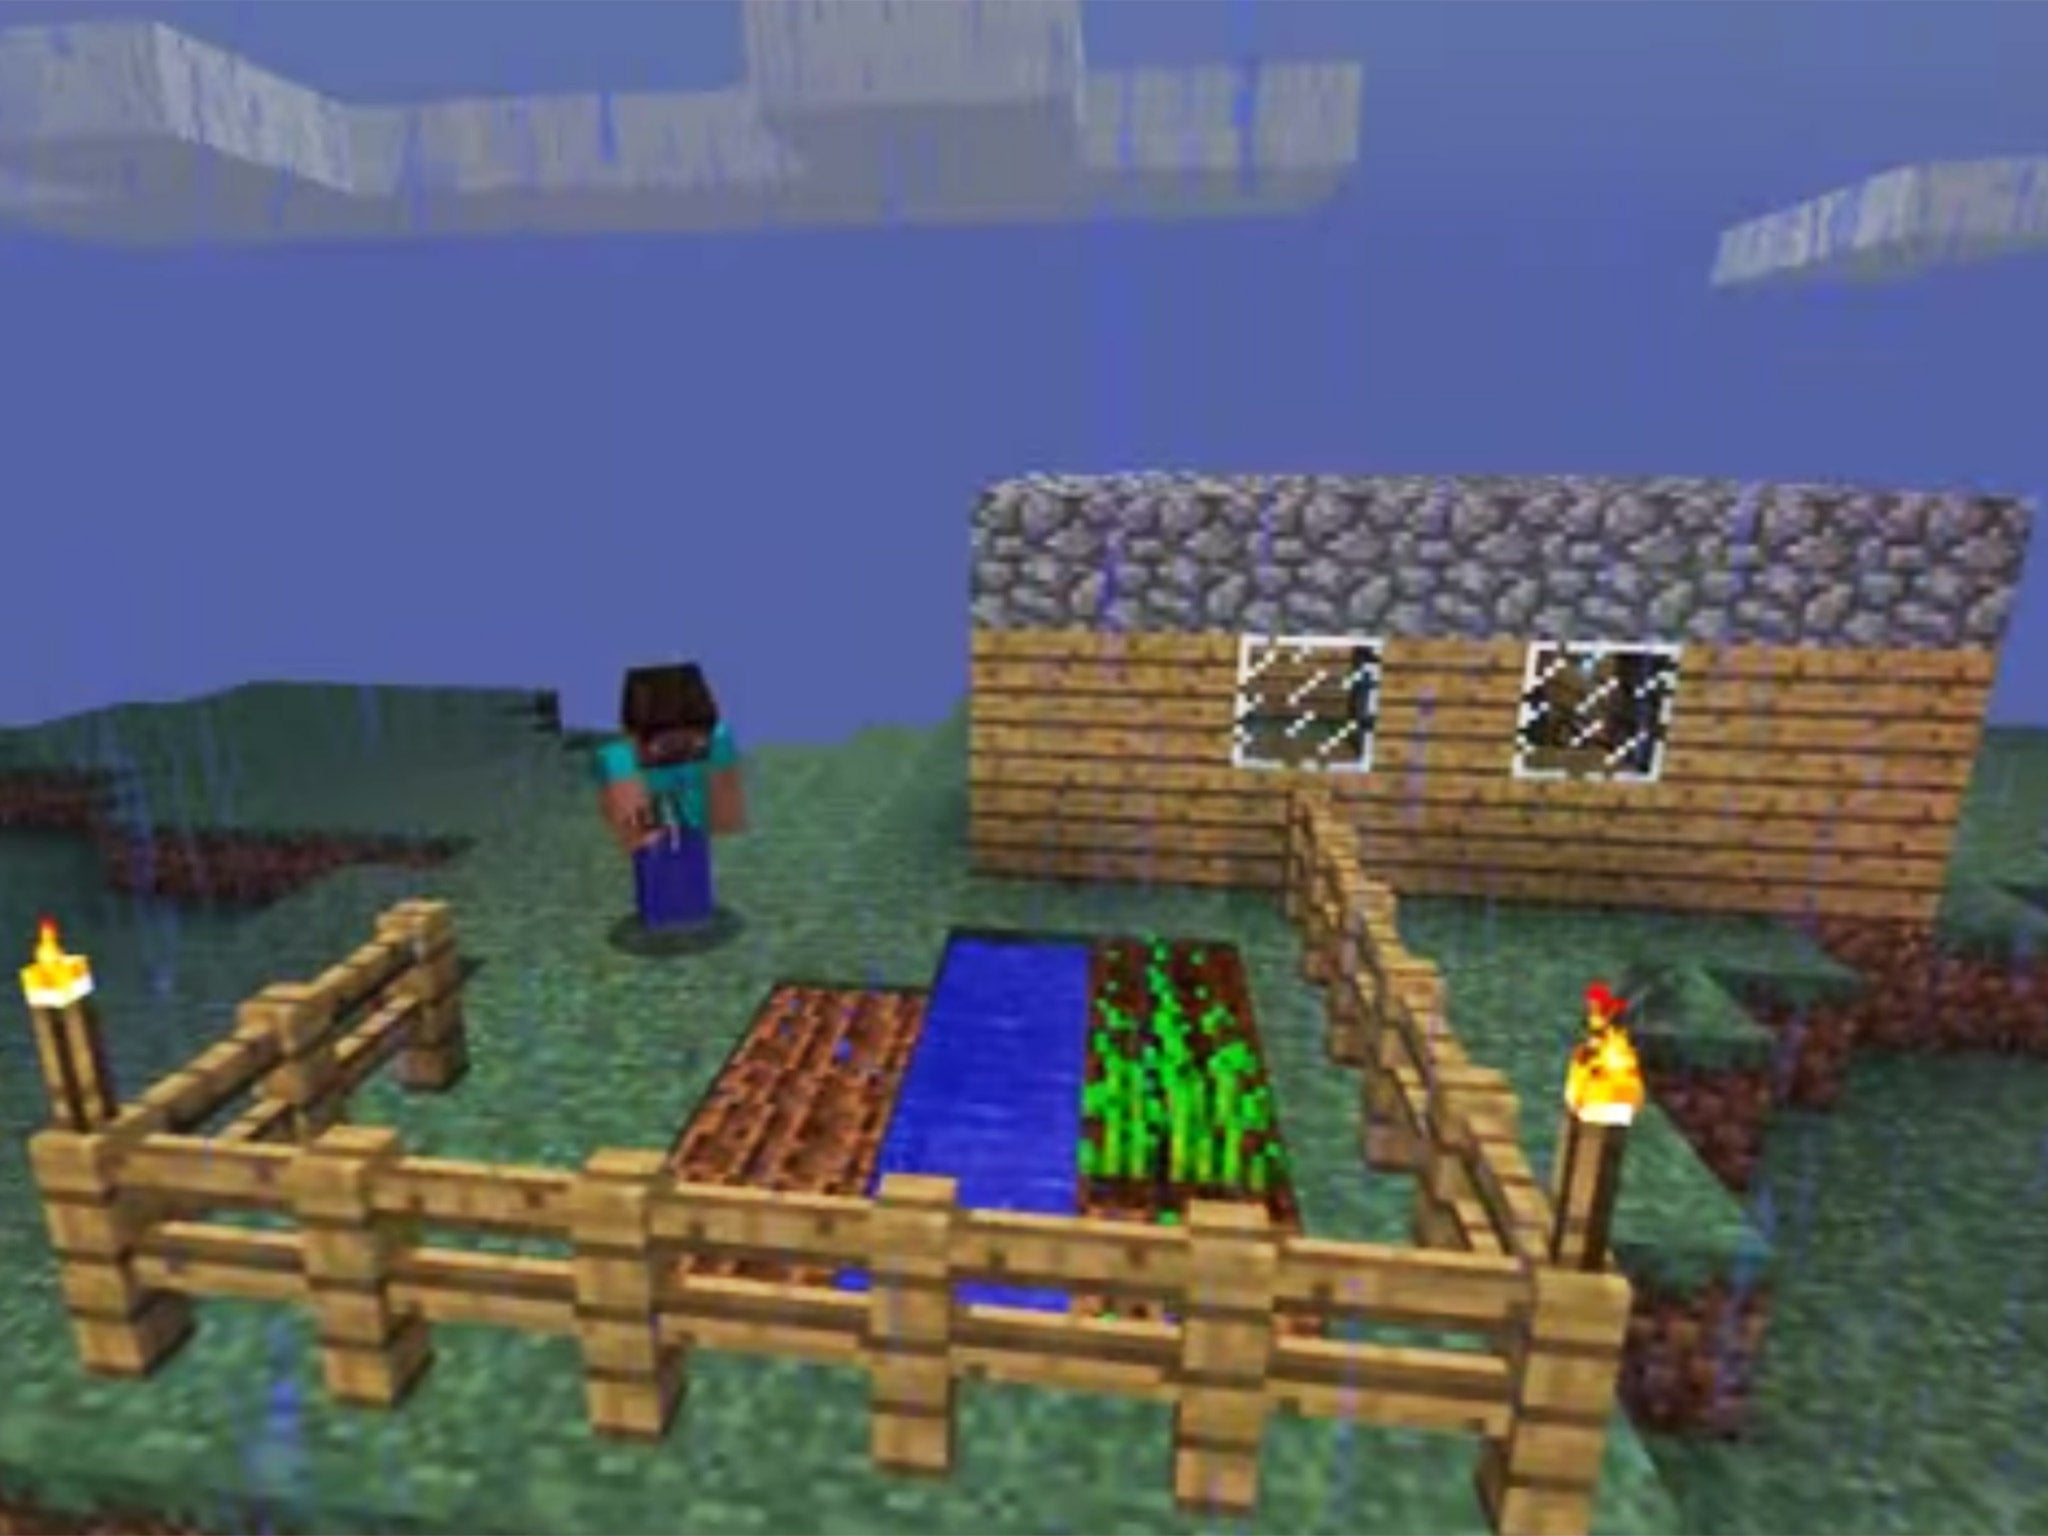 Minecraft has inspired the creativity of gamers and developers alike